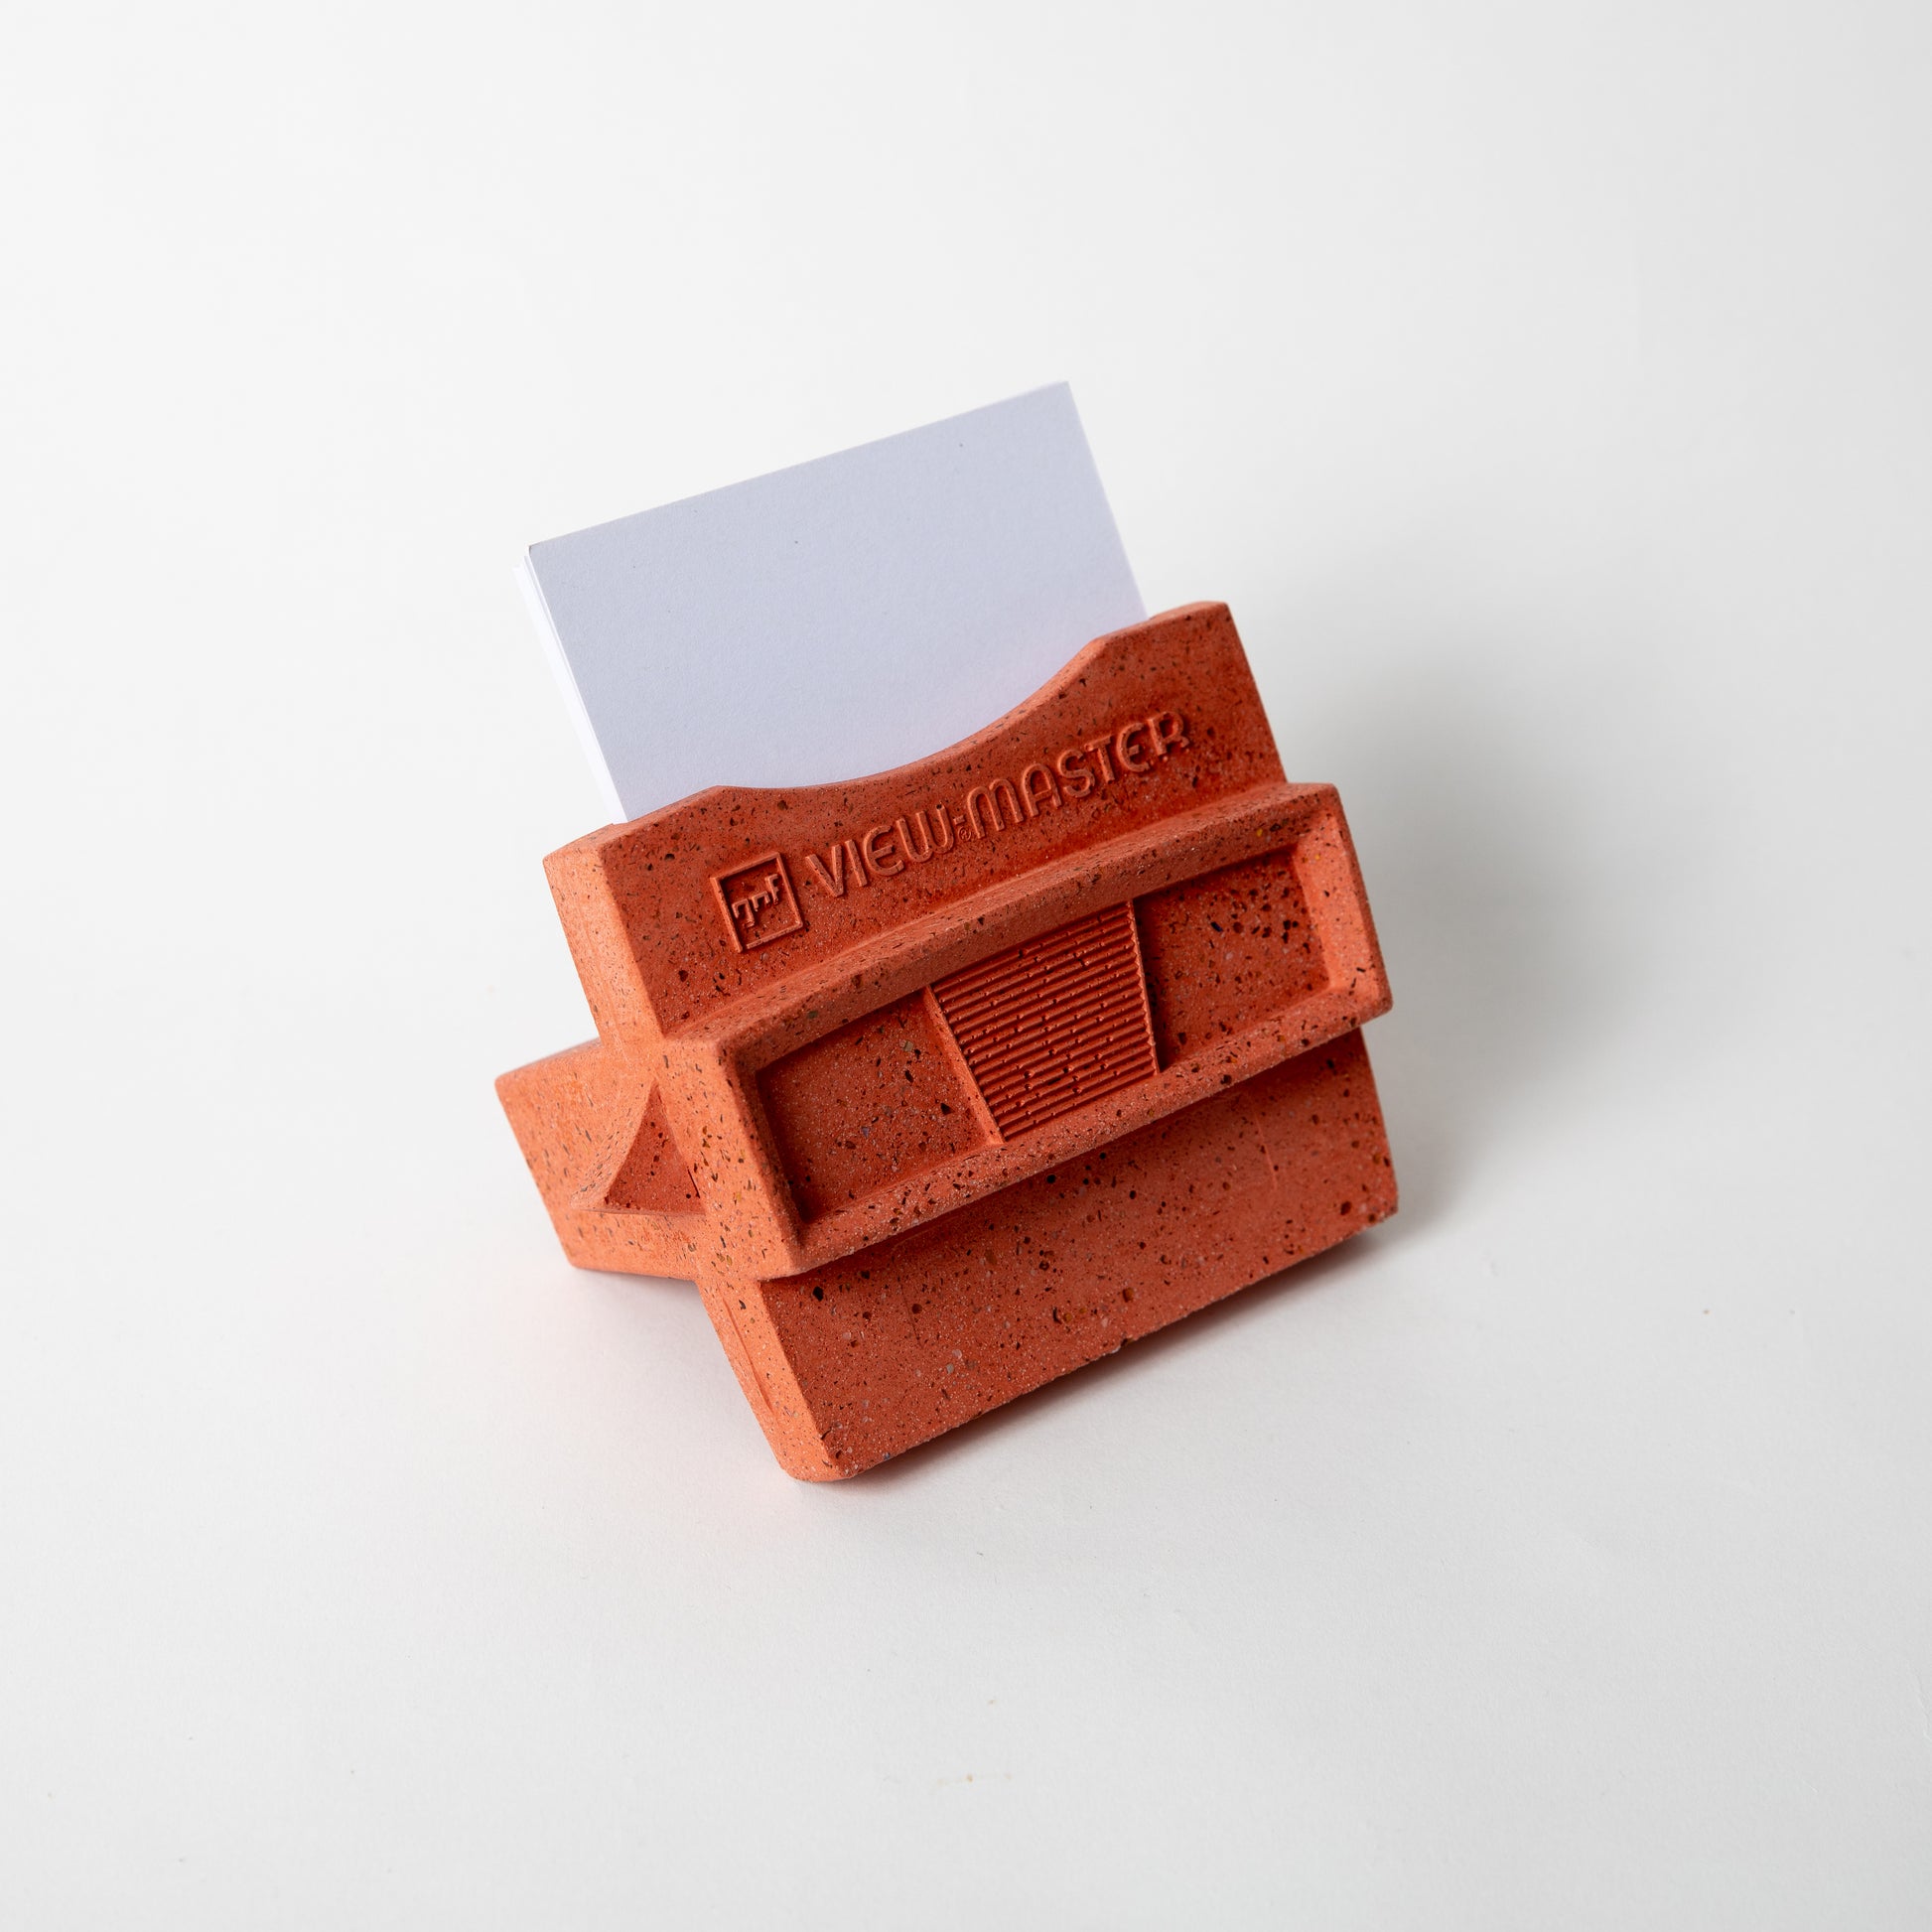 The Retro Business Card Holder in Coral Terrazzo w/ blank business cards placed inside.